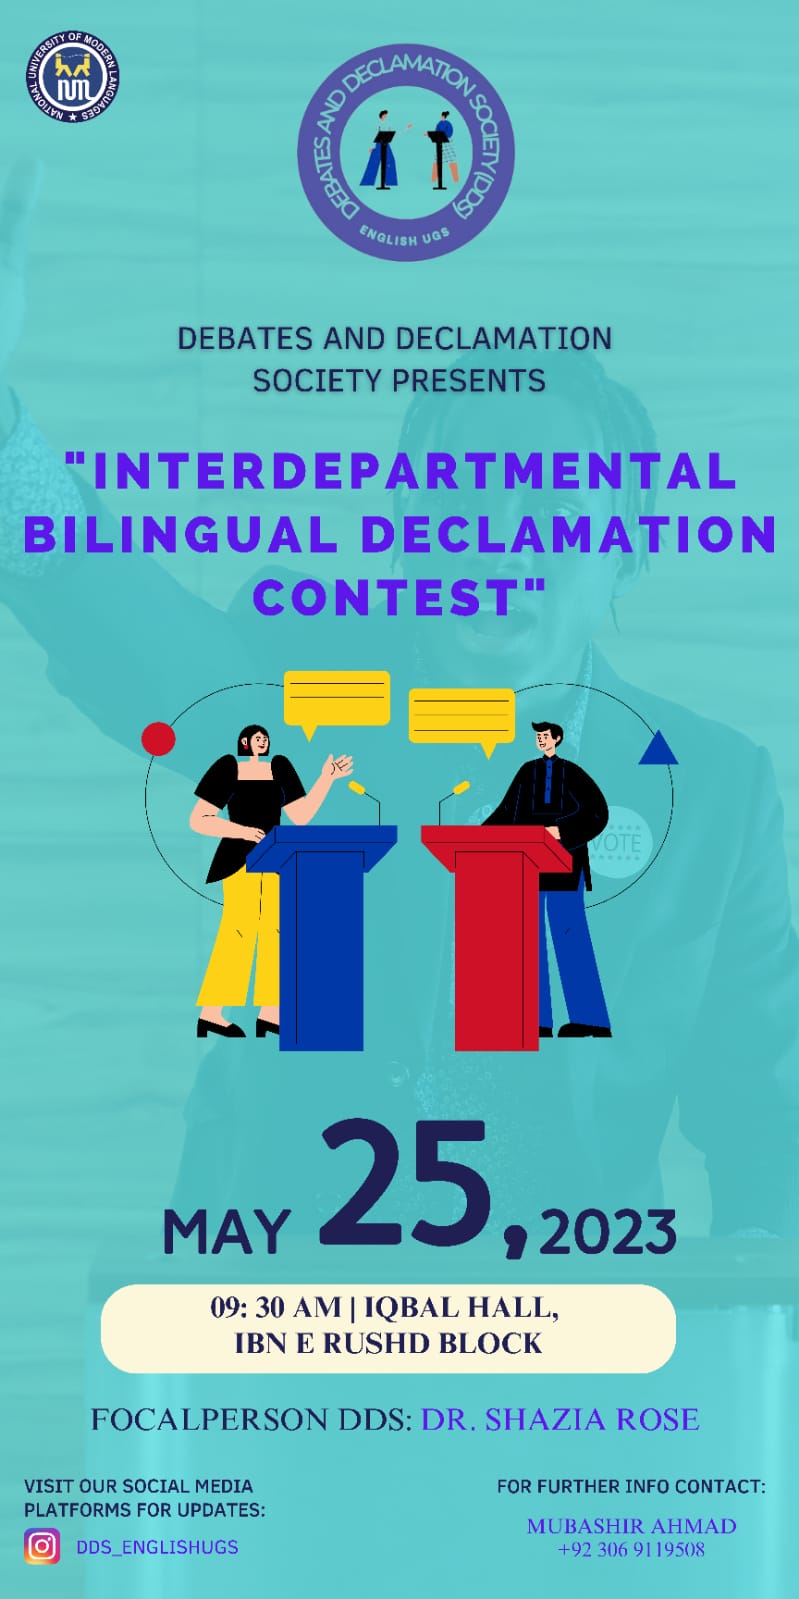 Interdepartmental Bilingual Declamation Contest by Debates and Declamation Society DDS) of Department of English (UGS) on 25th May in both English and Urdu. Click on the title to see the topics.